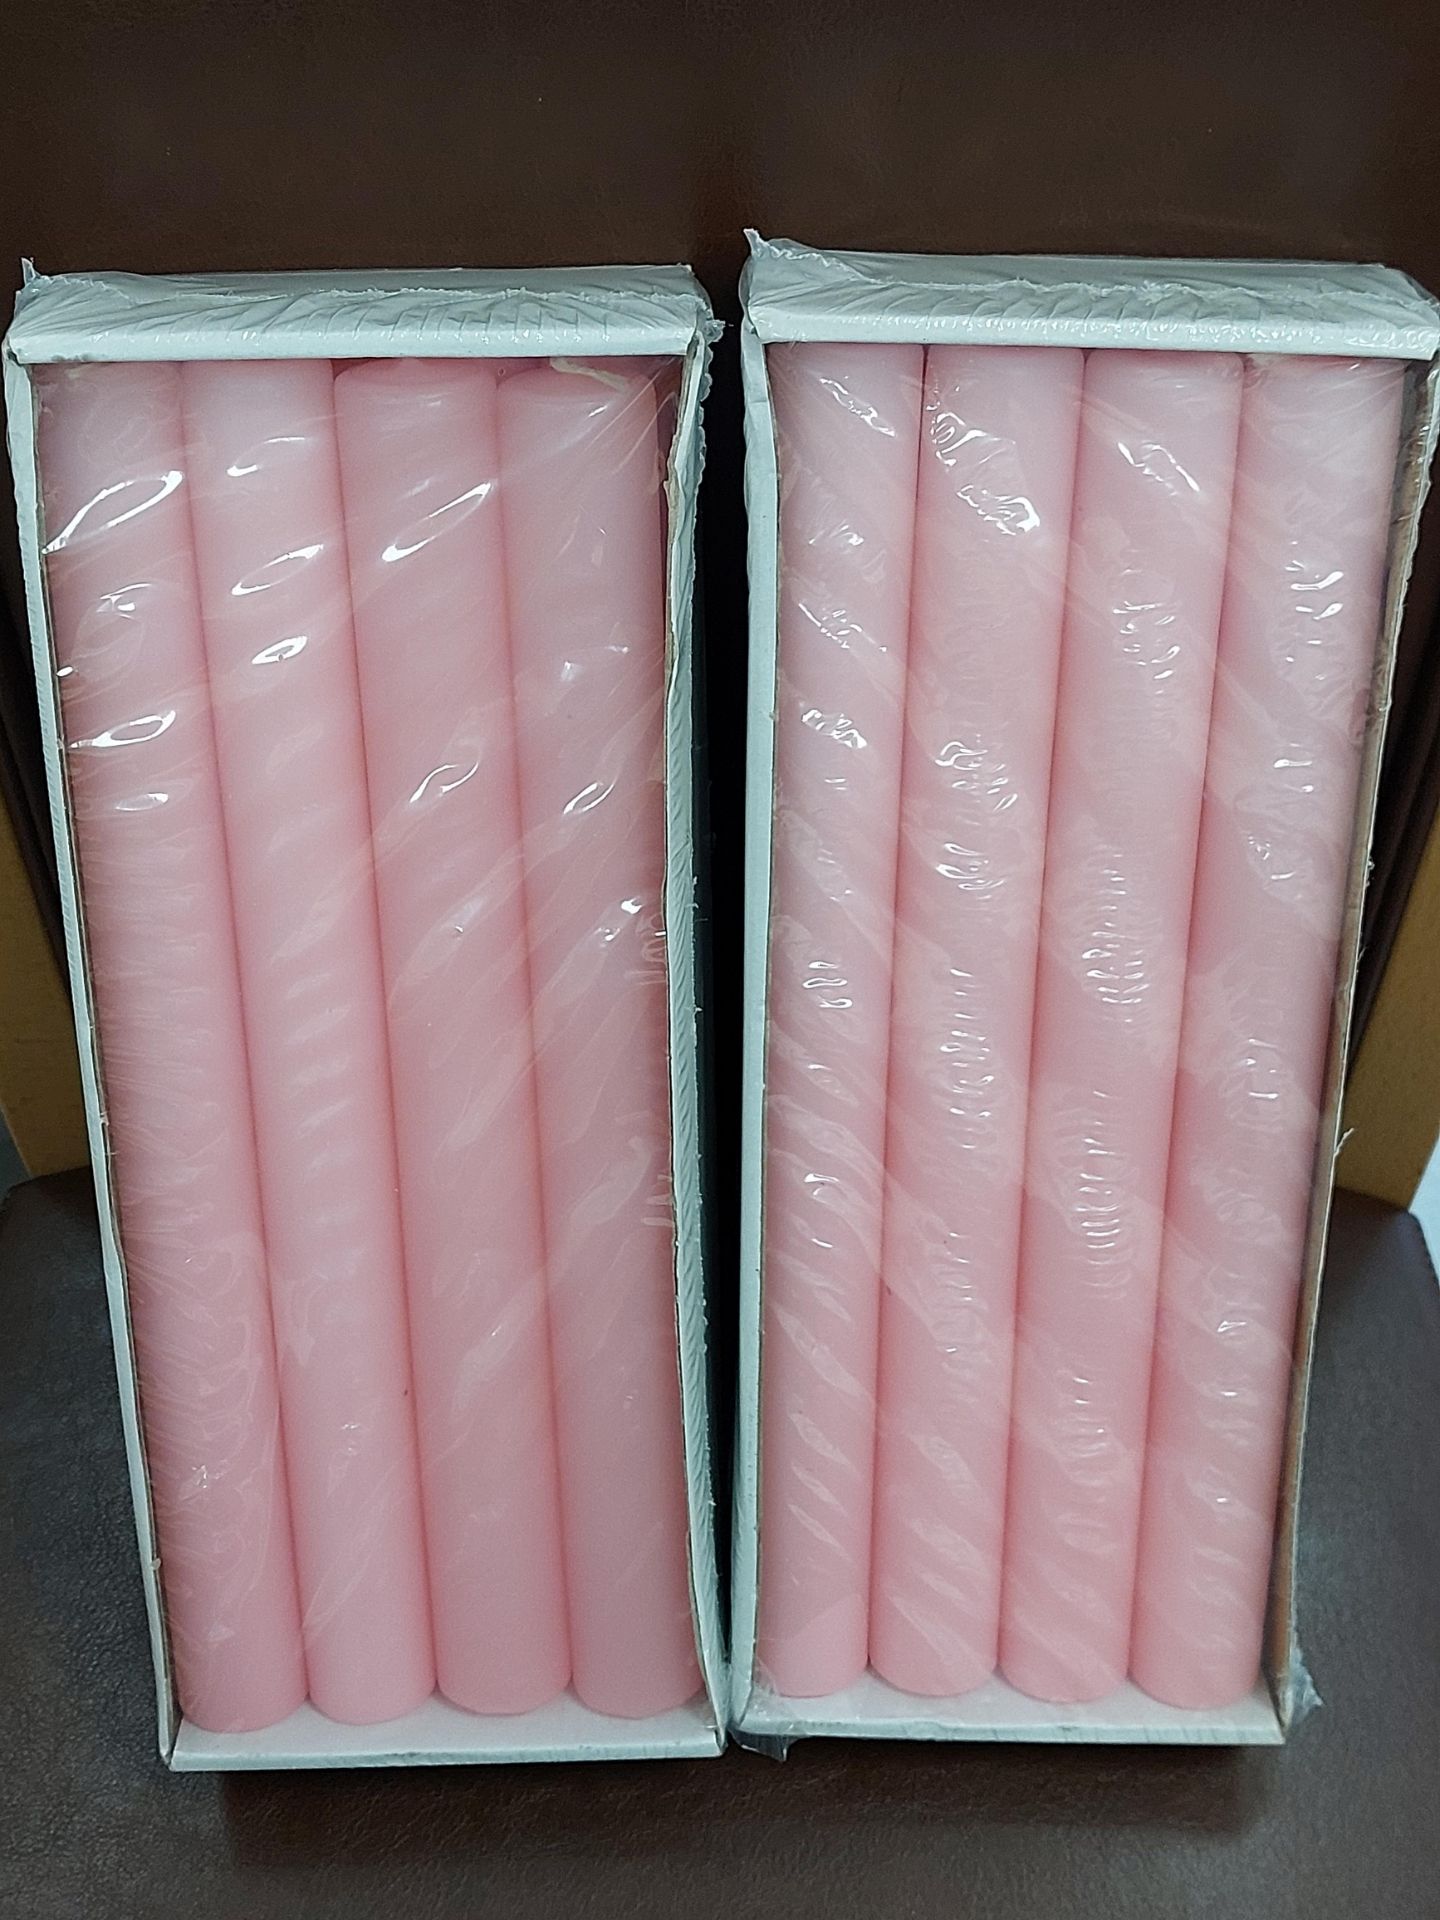 Large pink candles 300 mm x 30 mm. 2 boxes of 8 - Image 6 of 7